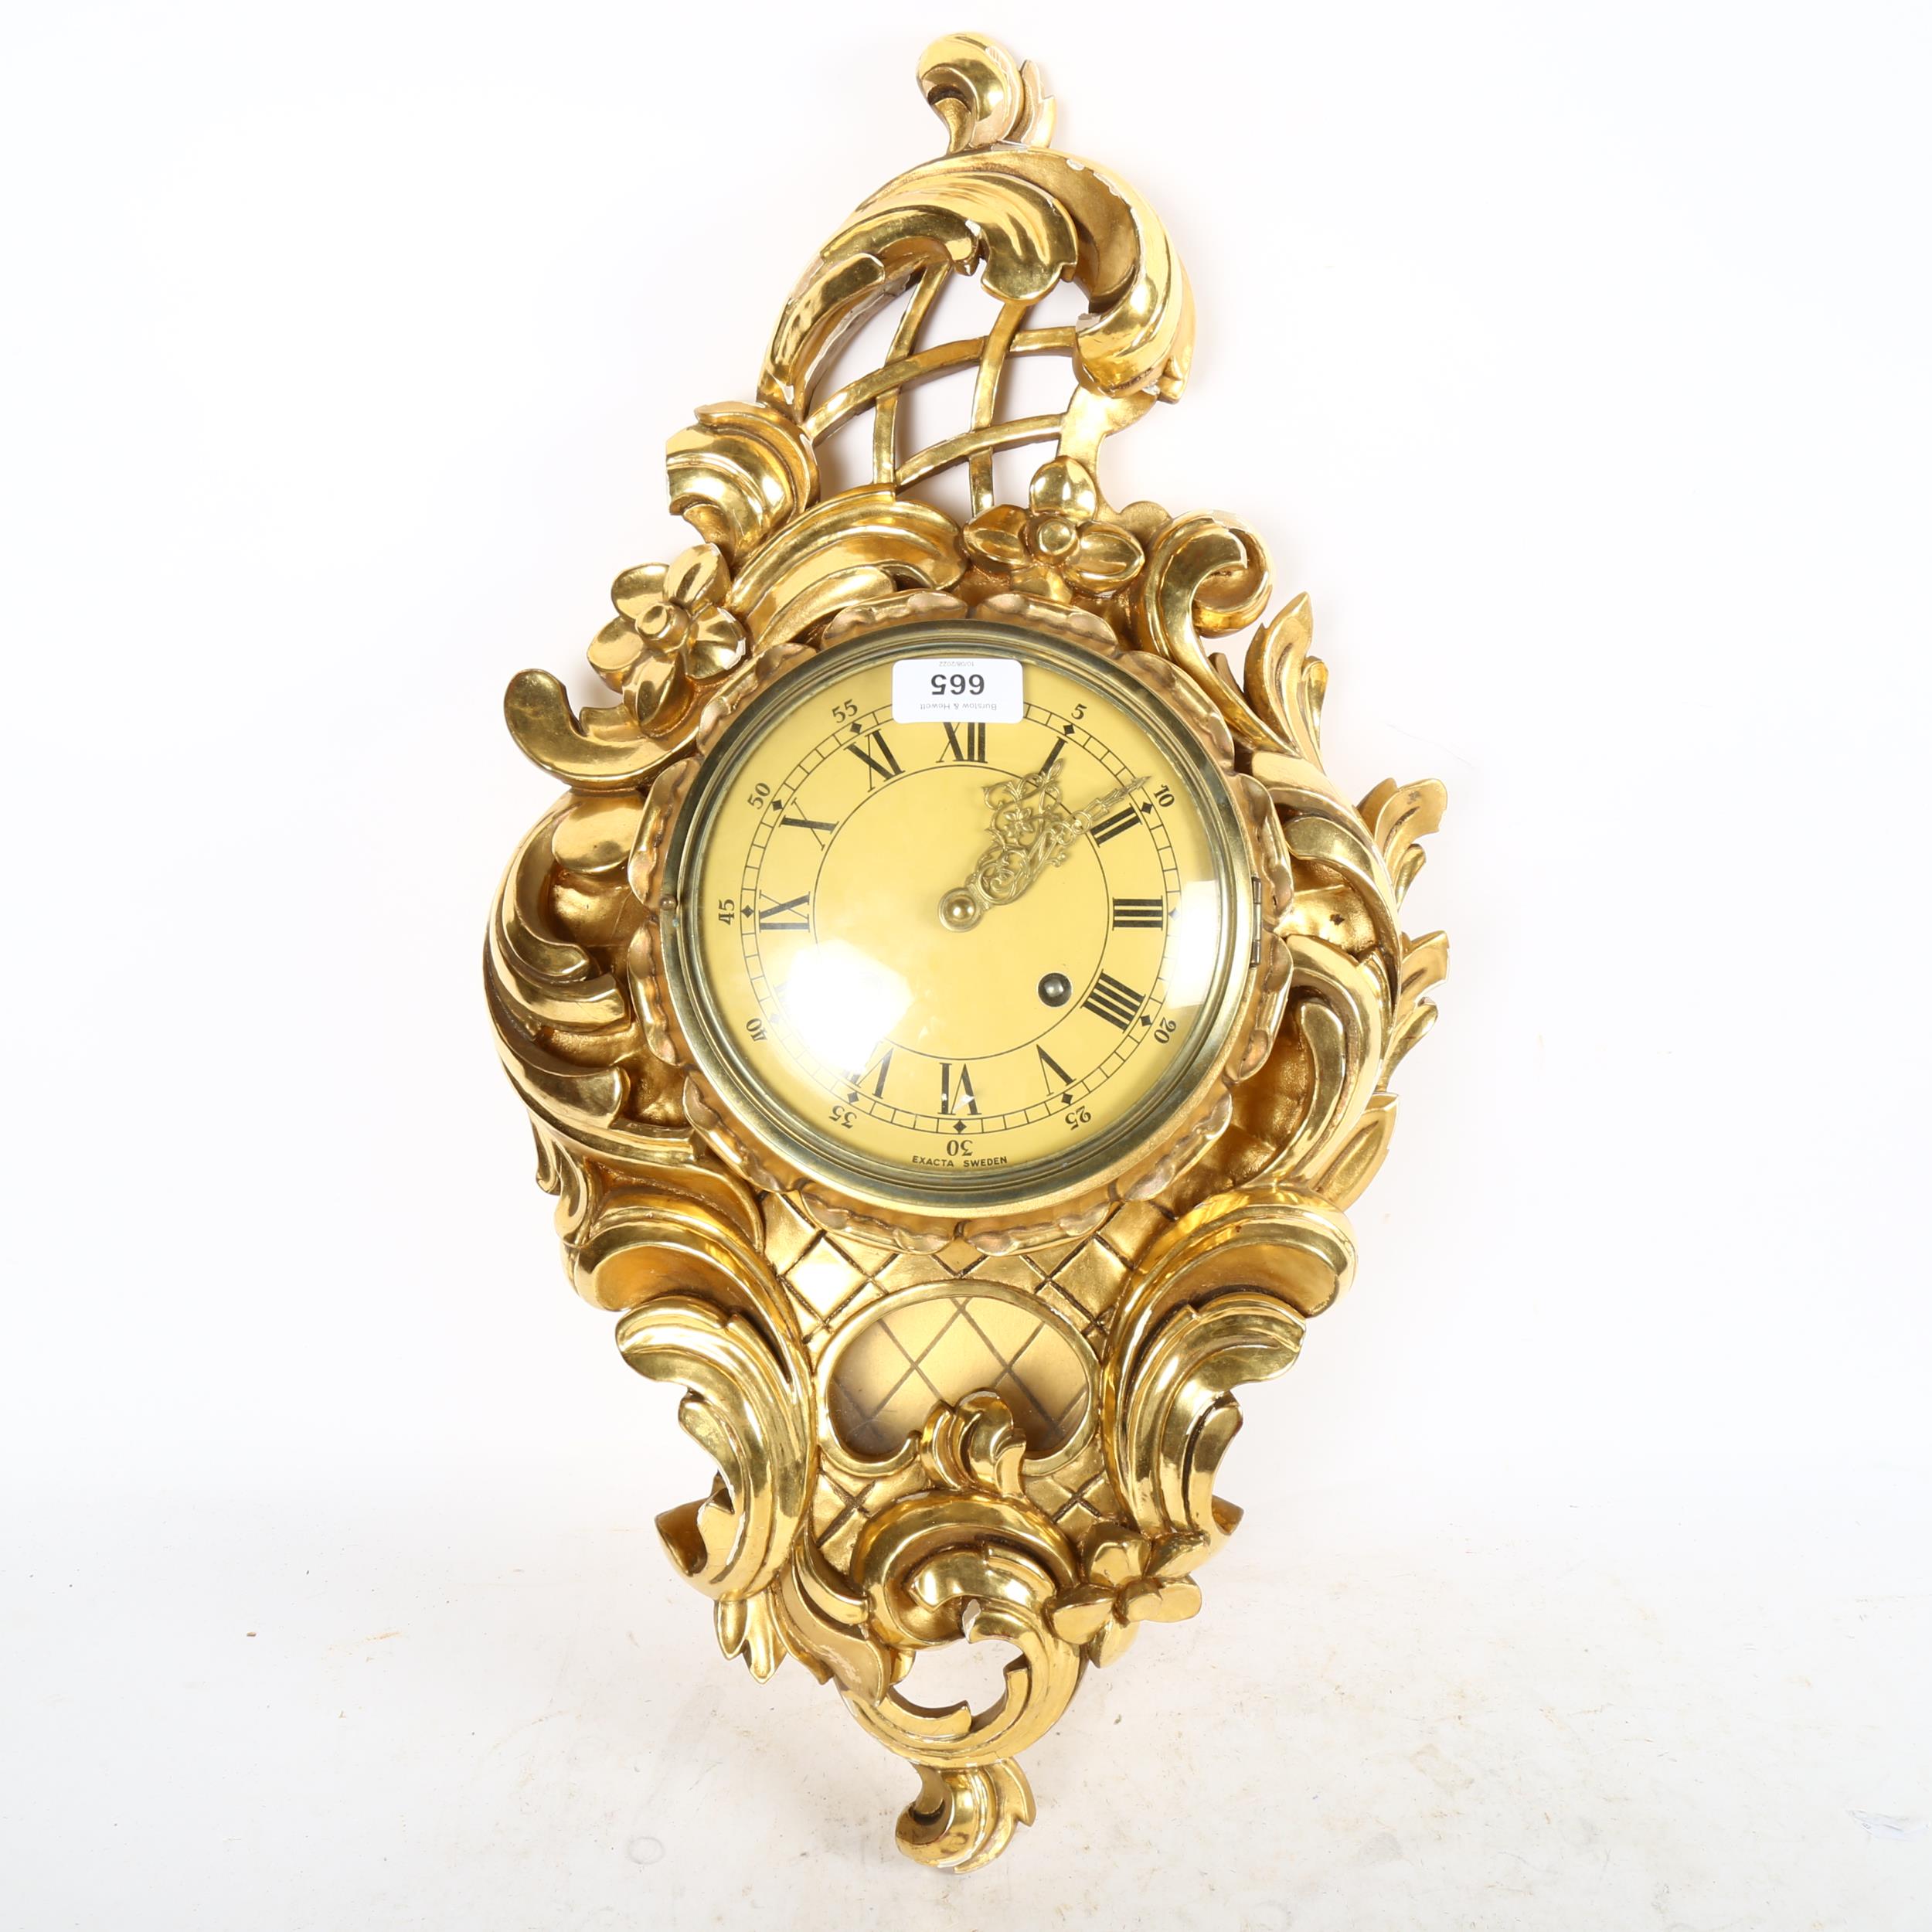 A reproduction gilt-gesso Cartel clock, with 8-day movement, by Exacta, Sweden, height 60cm